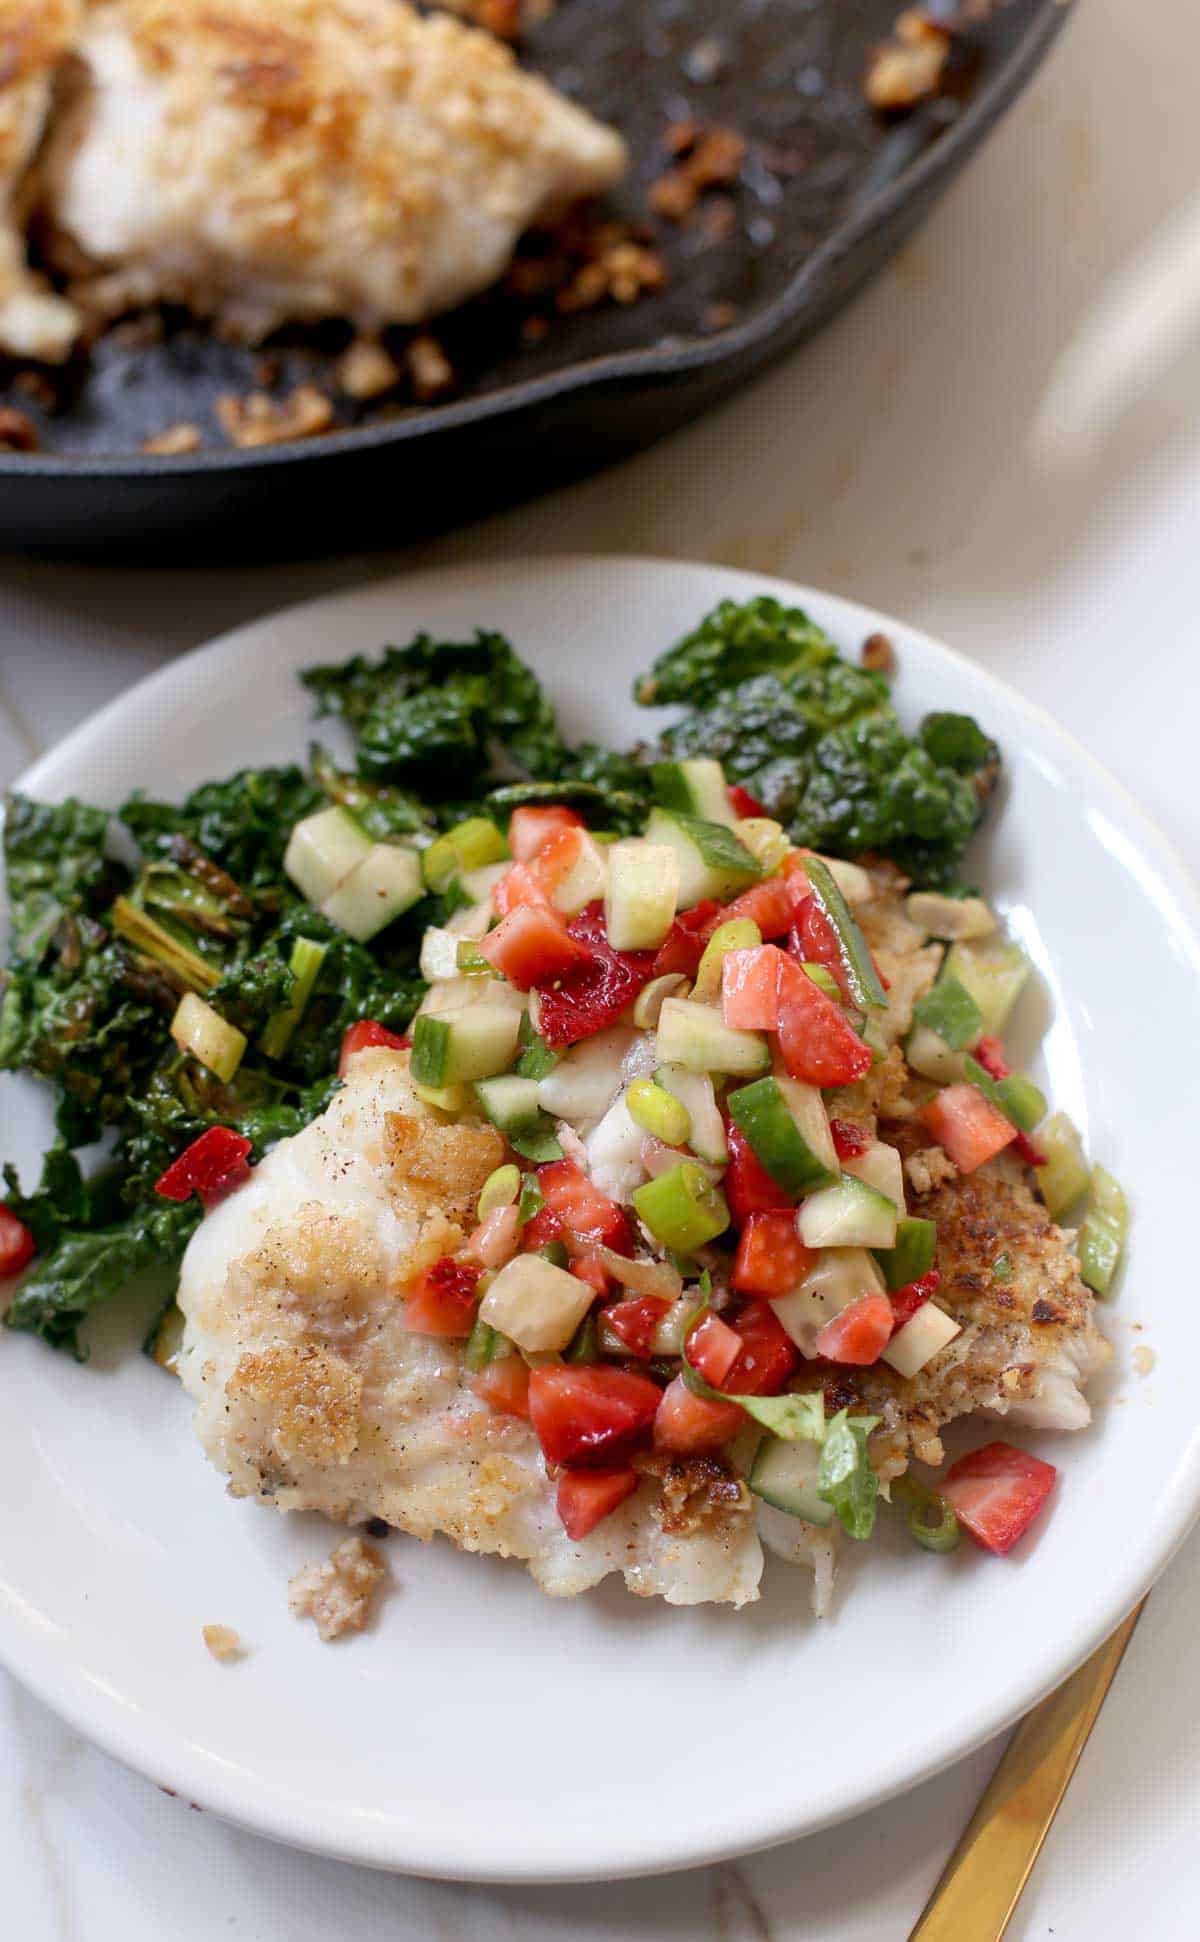 Macadamia Crusted Halibut with Strawberry Salsa is an amazing halibut recipe to cook when looking for a dairy free, healthy dinner recipe for Valentine's Day or any other weeknight dinner. halibut recipe | nut crusted fish | macadamia crusted halibut